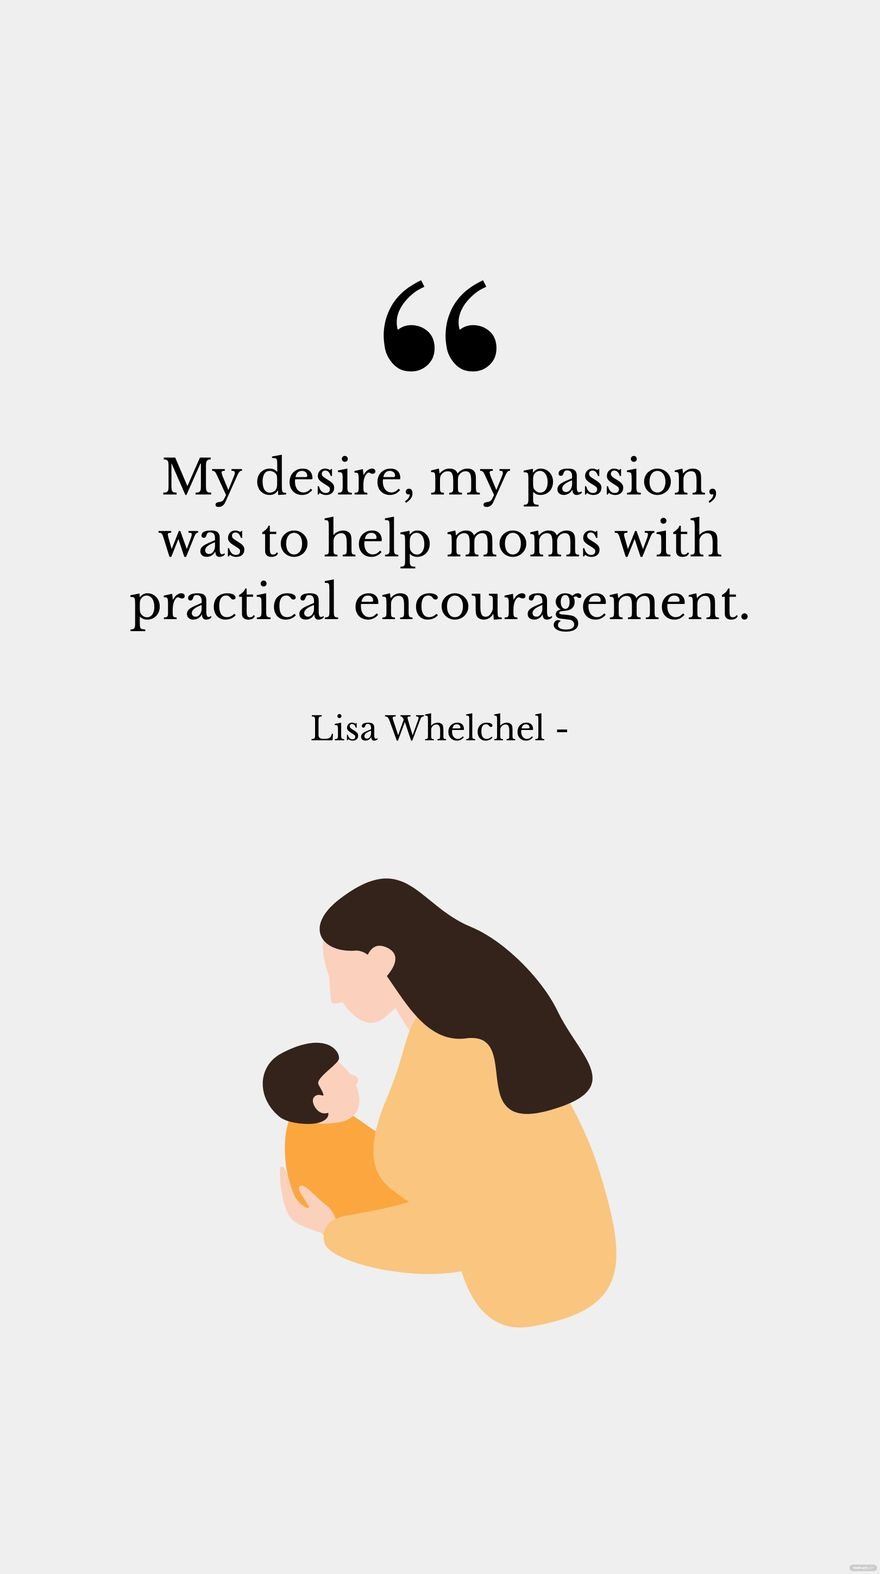 Lisa Whelchel - My desire, my passion, was to help moms with practical encouragement. Template